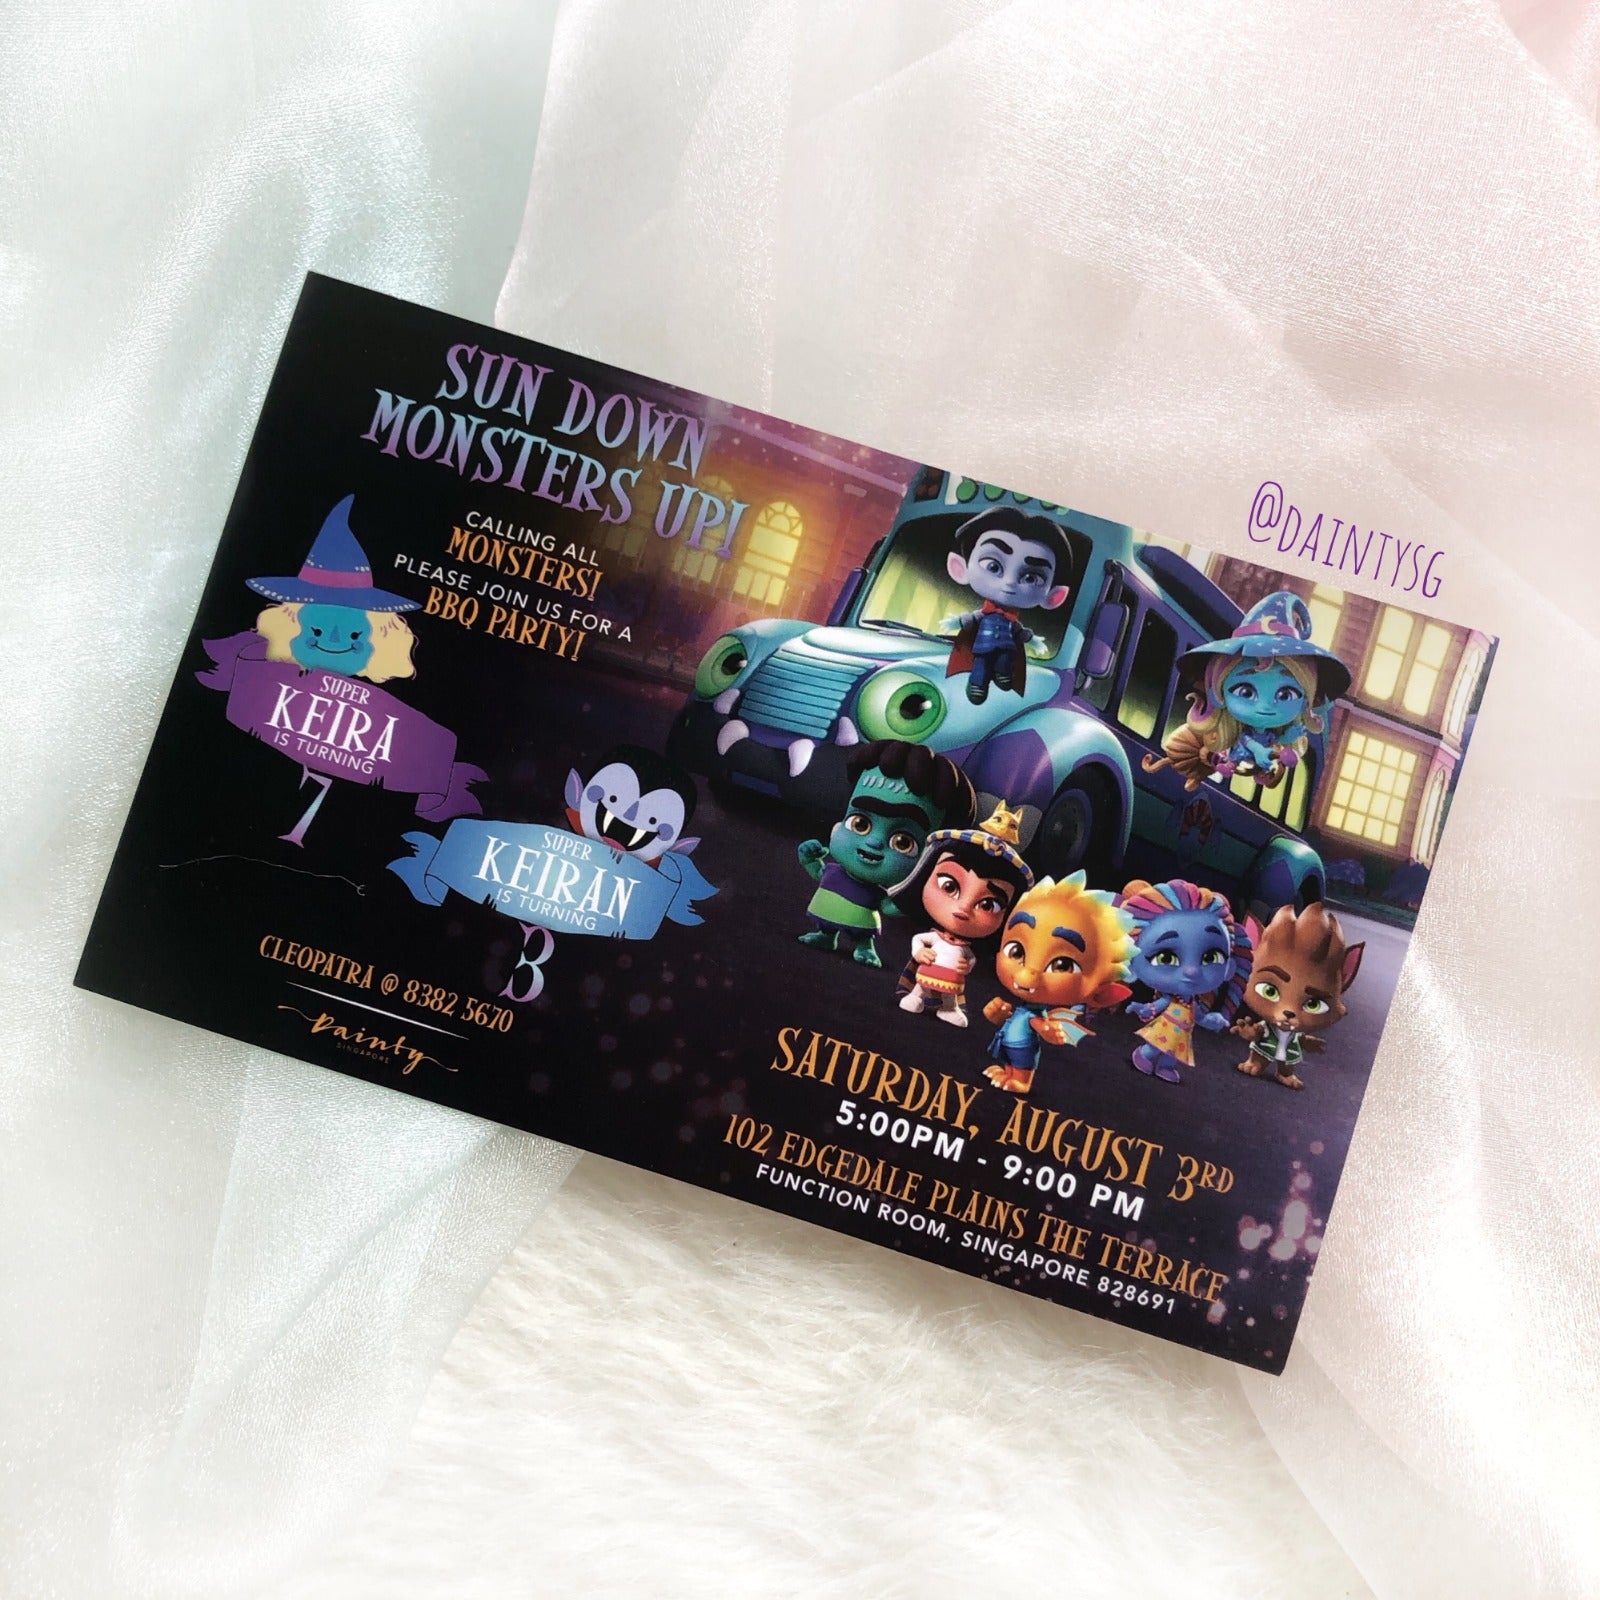 Super Monsters Birthday Invitations. THEORY OF TWO STUDIO is based and shipped from Singapore.